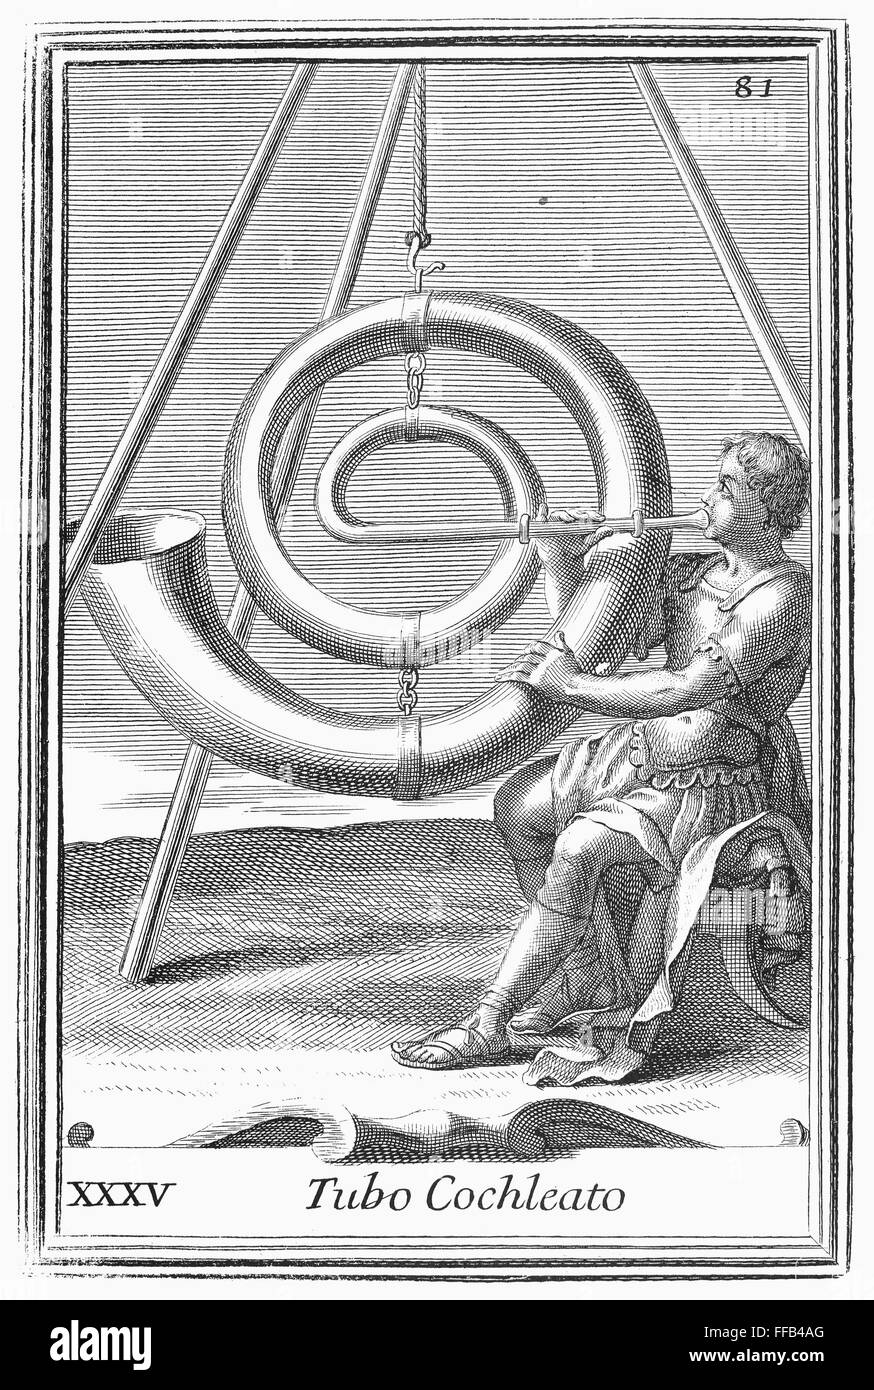 VOICE AMPLIFIER. /nAn imaginary voice amplifier, based on the ideas of Athanasius Kircher. Copper engraving, 1723, by Arnold van Westerhout. Stock Photo